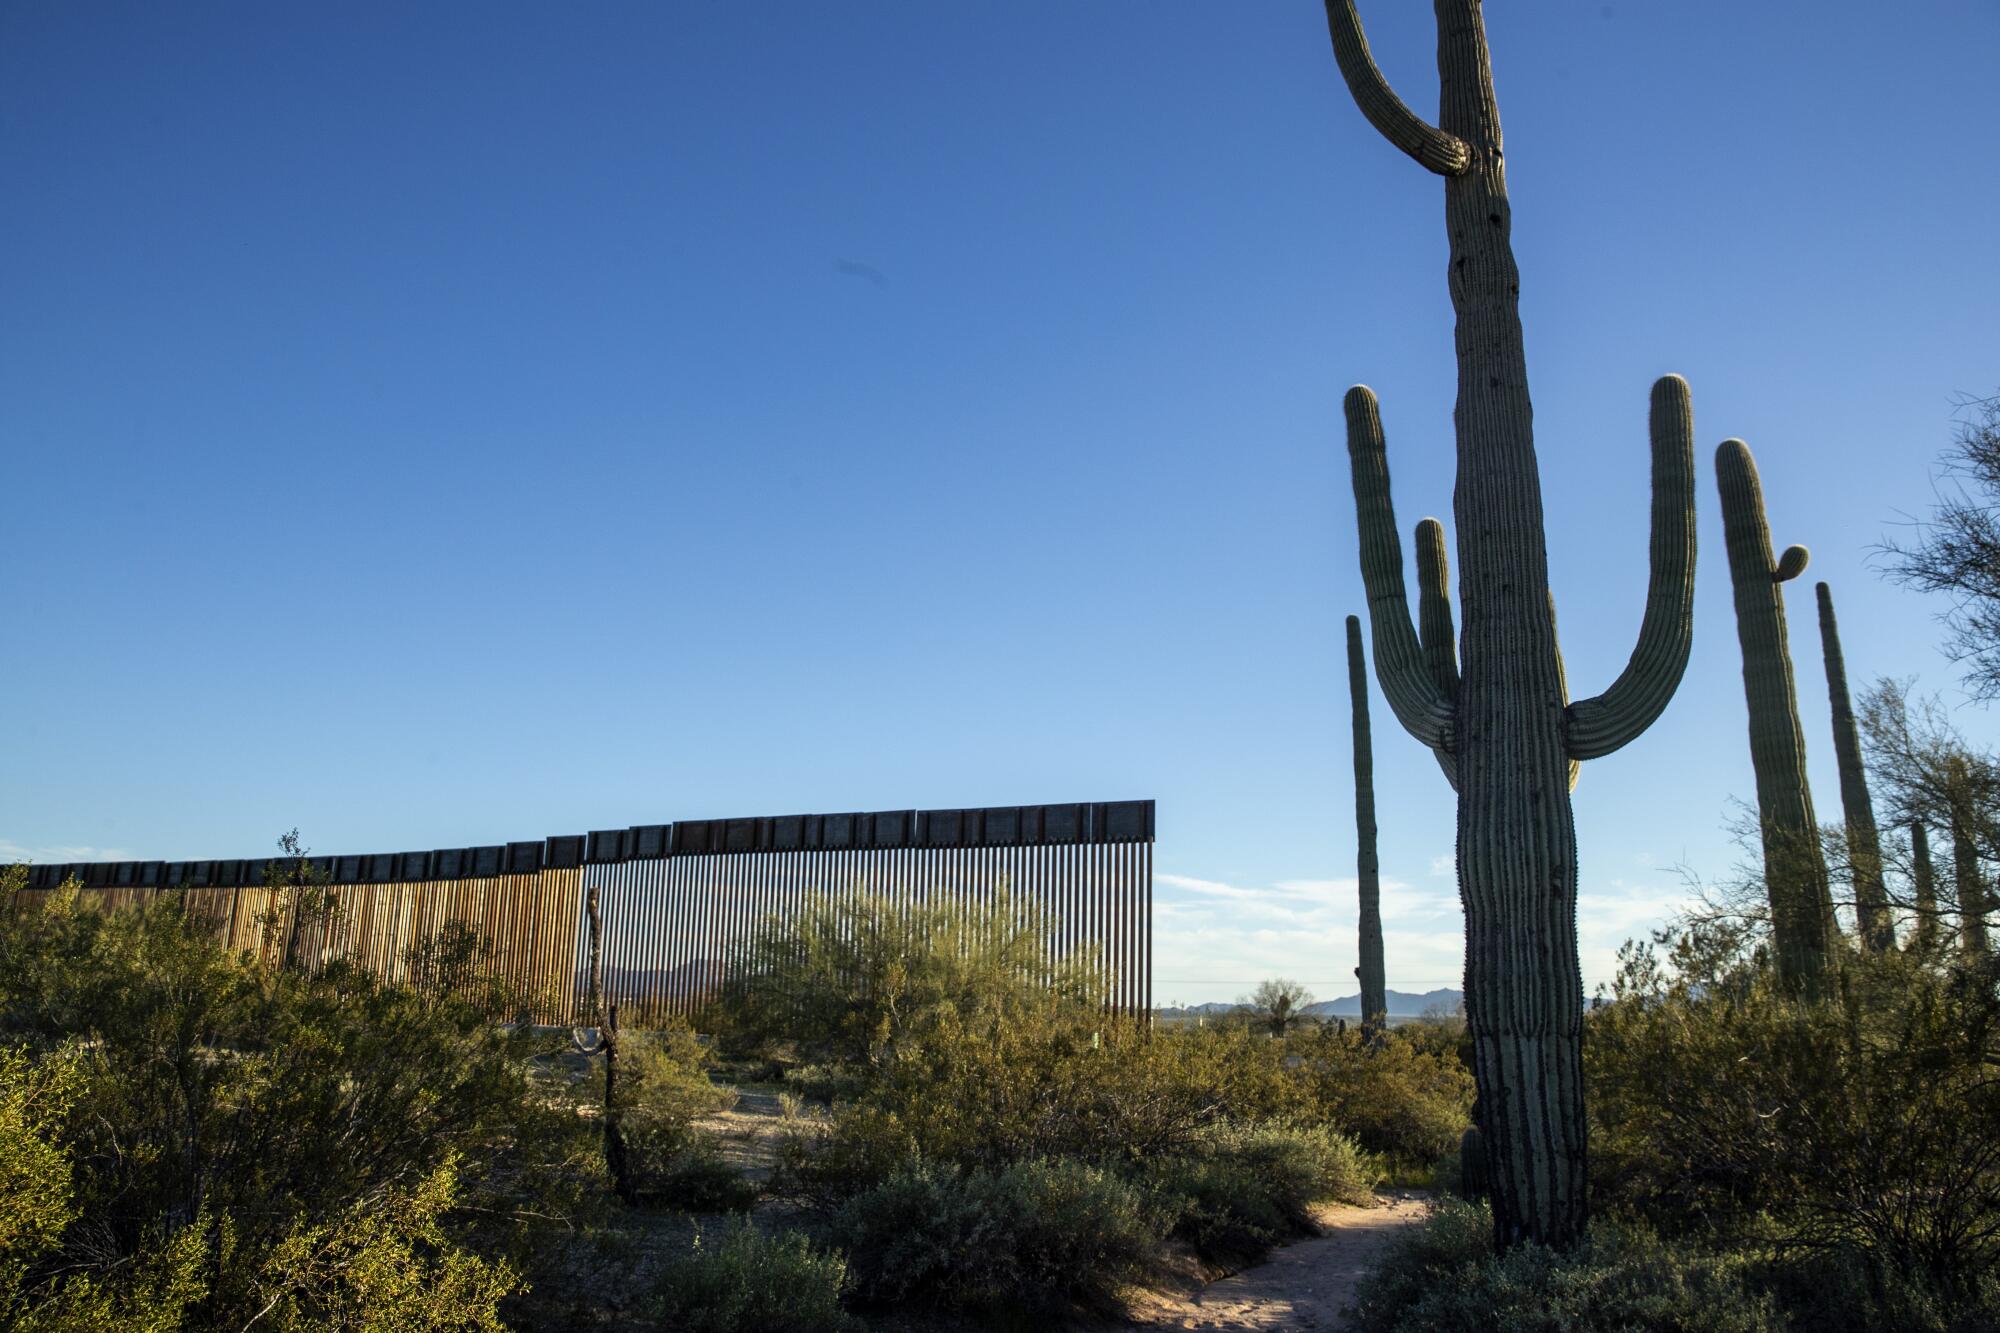 Saguaro cactuses stand outside the Roosevelt easement where a new border wall is replacing a vehicle barrier west of Lukeville, Ariz., in Organ Pipe Cactus National Monument.